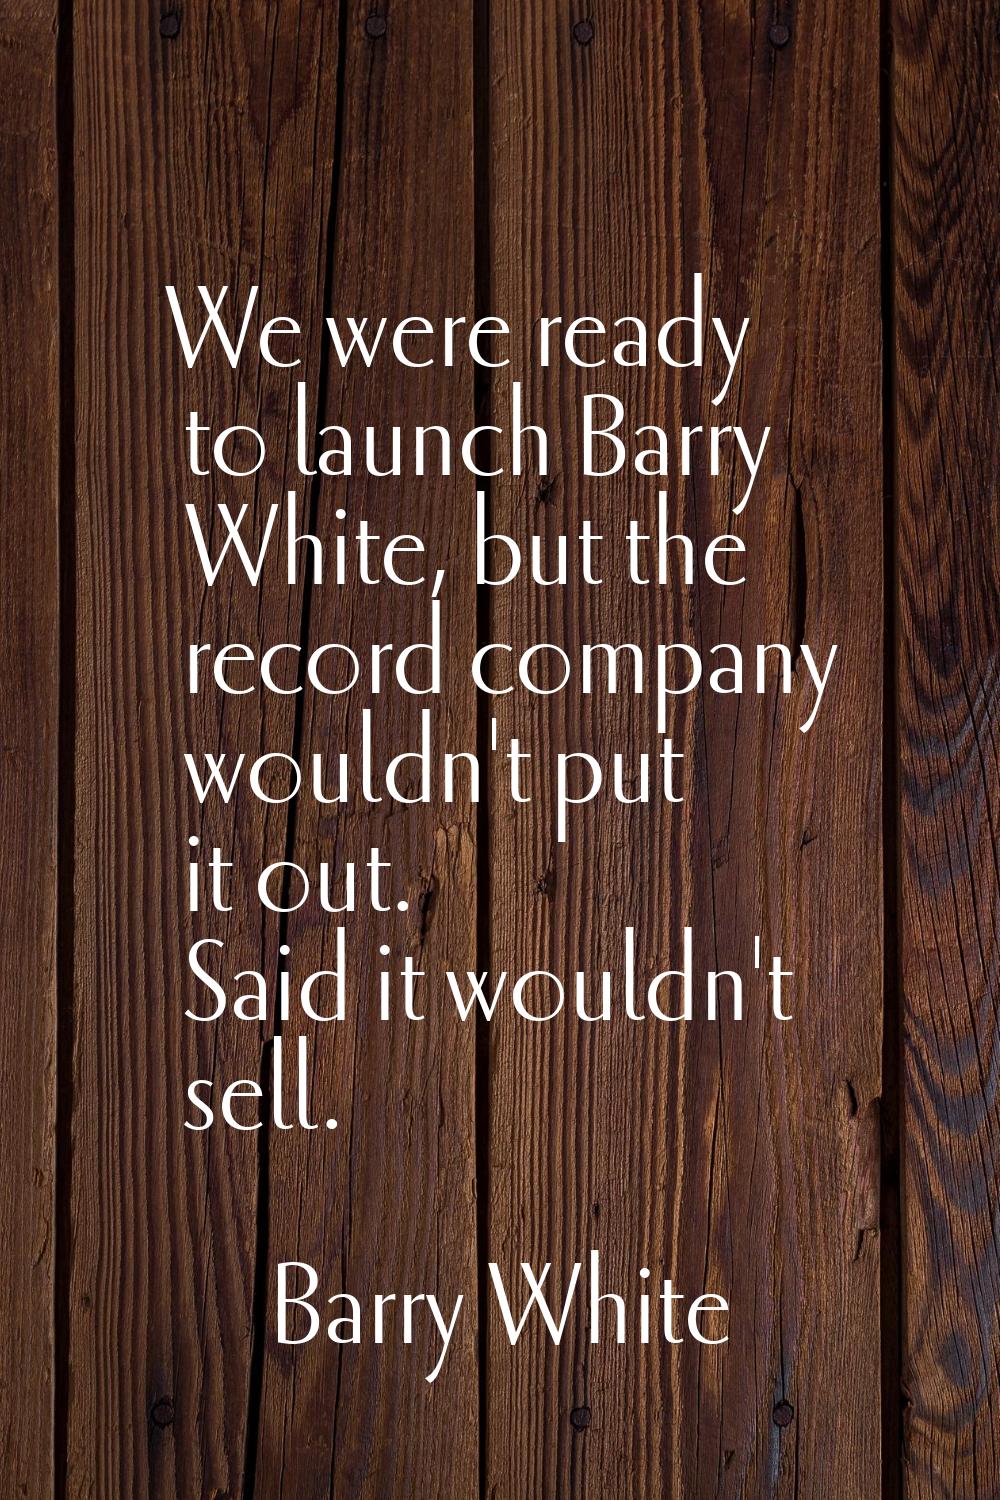 We were ready to launch Barry White, but the record company wouldn't put it out. Said it wouldn't s